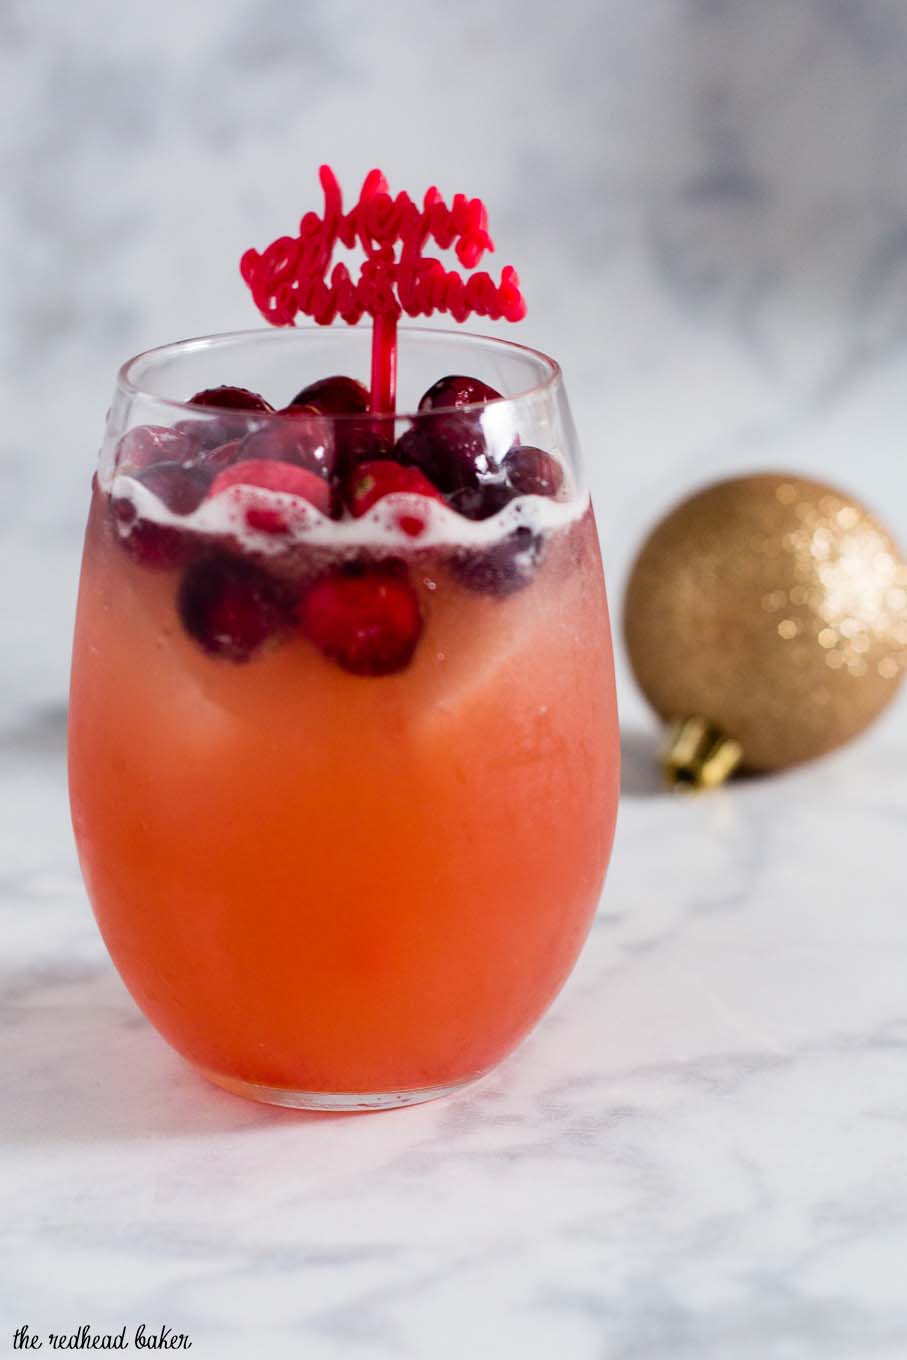 Cranberry cinnamon whiskey sour is an easy, festive cocktail for the Christmas season. Shake up a batch for your holiday party!